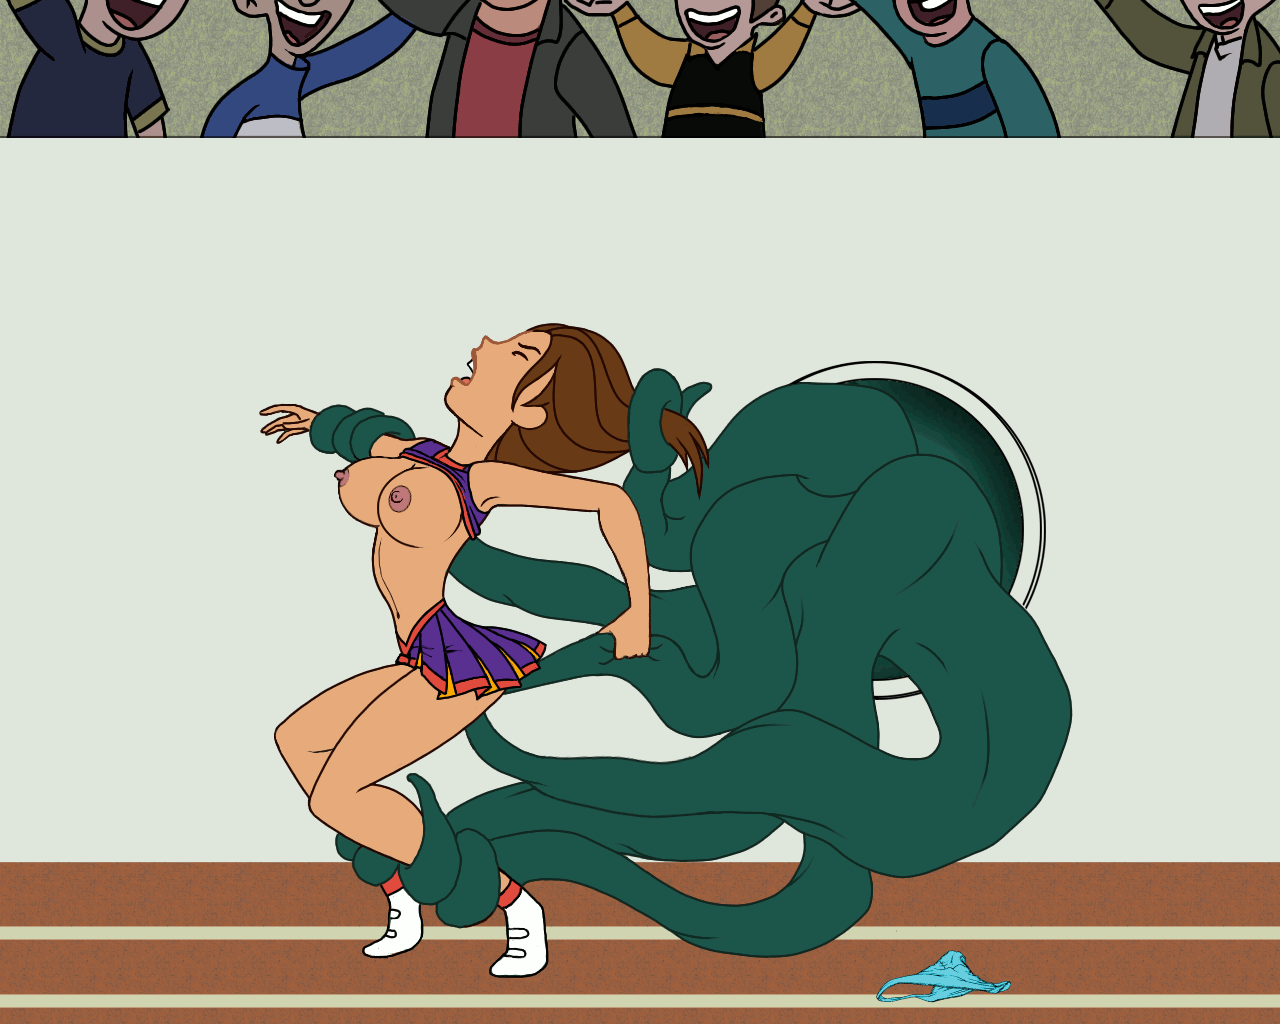 a topless cheerleader is held by a tentacle monster and thoroughly goosed and debauched until she jumps in a way that makes her tits jiggle